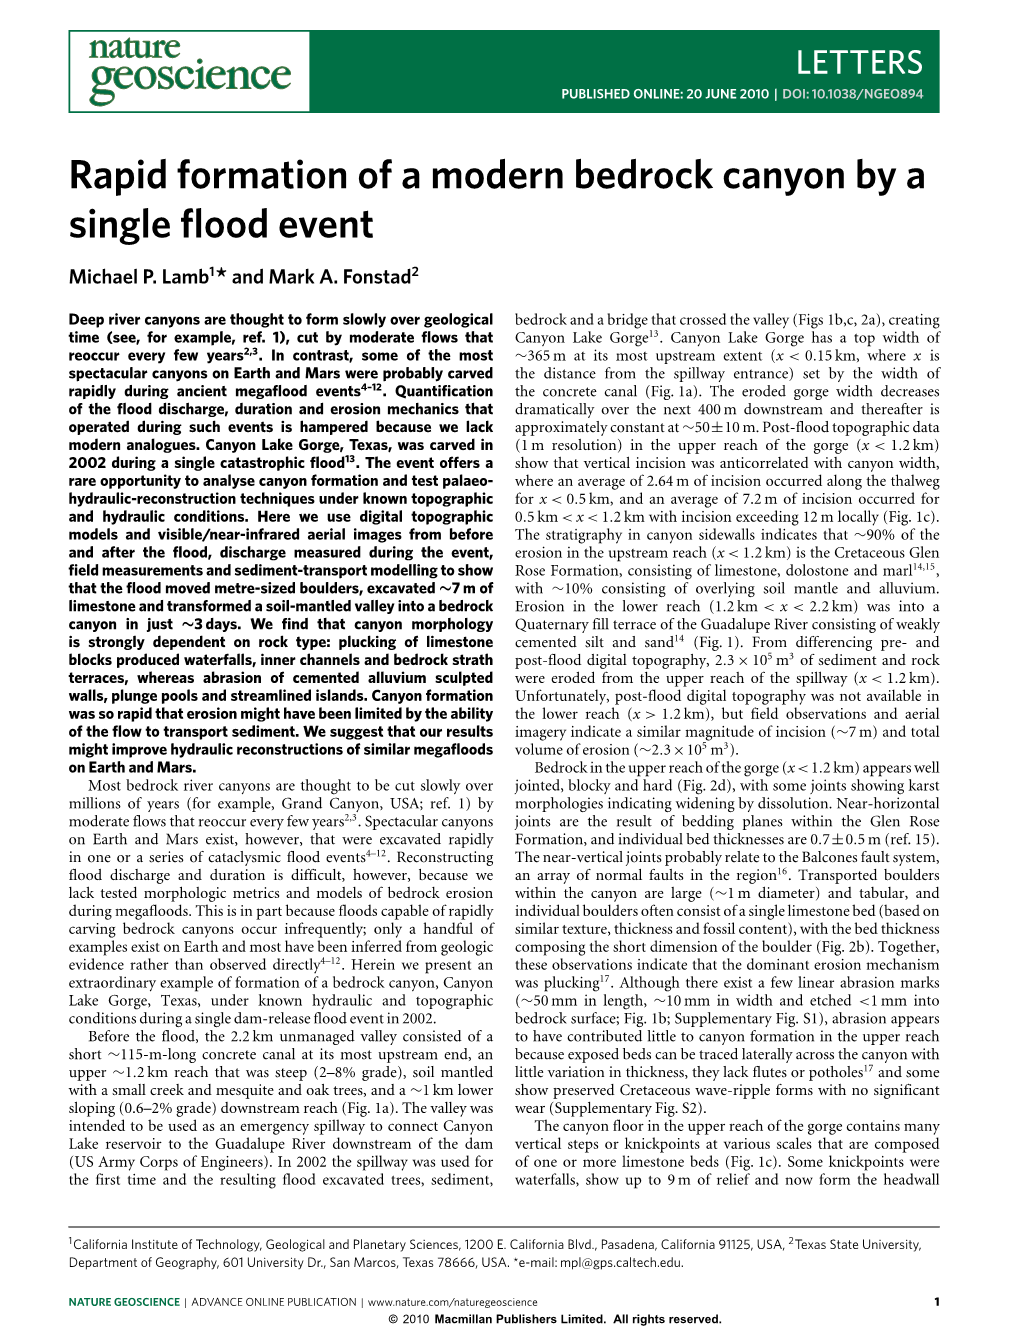 Rapid Formation of a Modern Bedrock Canyon by a Single Flood Event